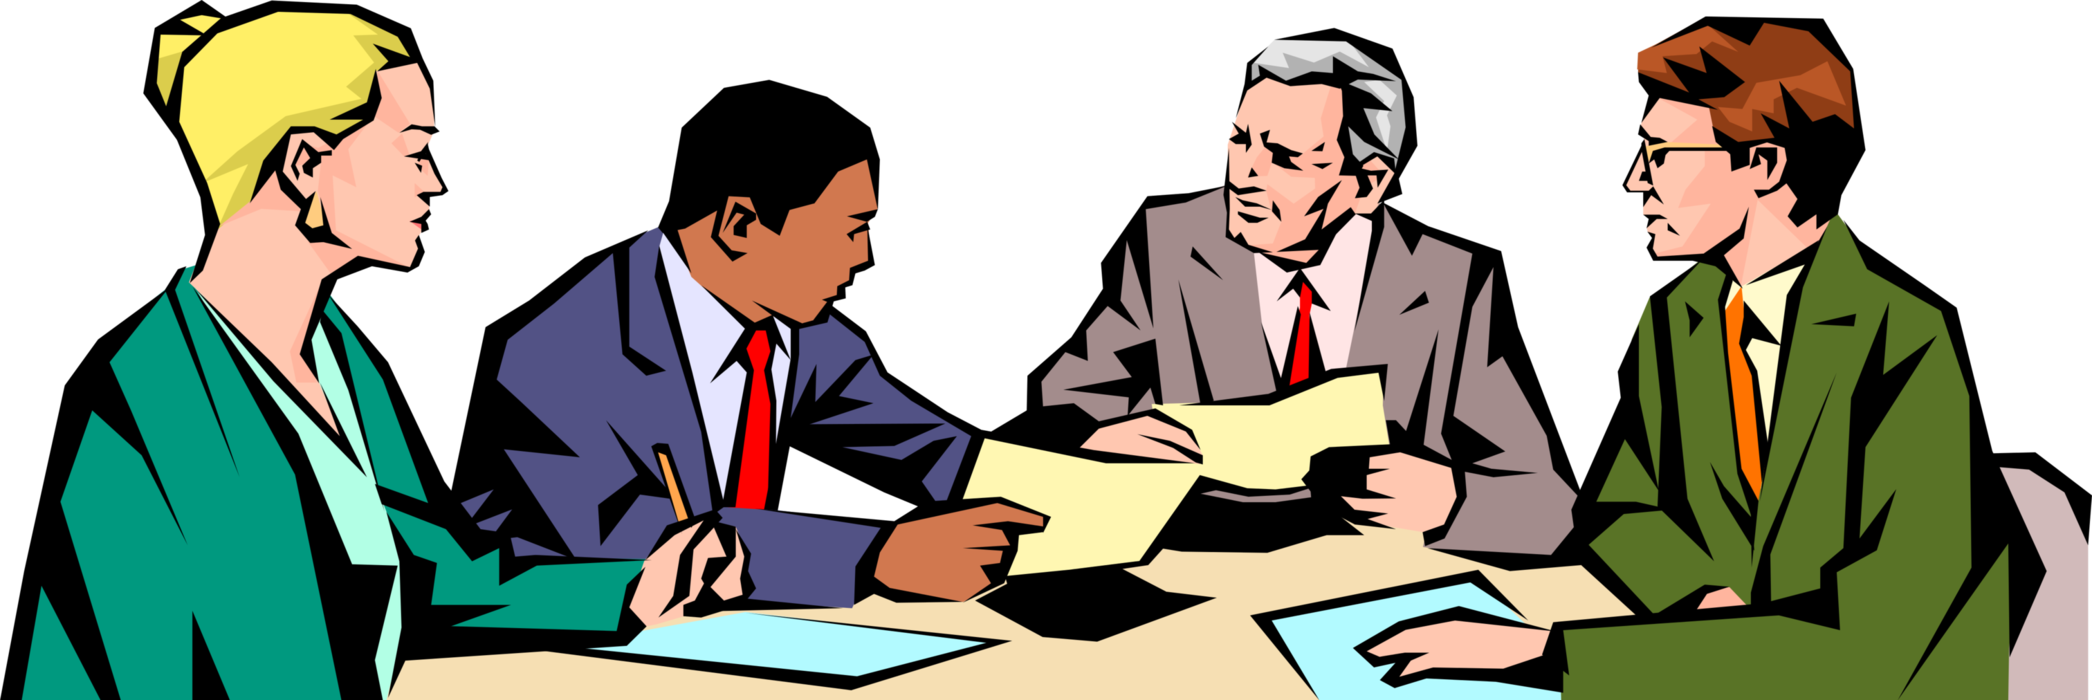 Vector Illustration of Boardroom Meeting and Discussion